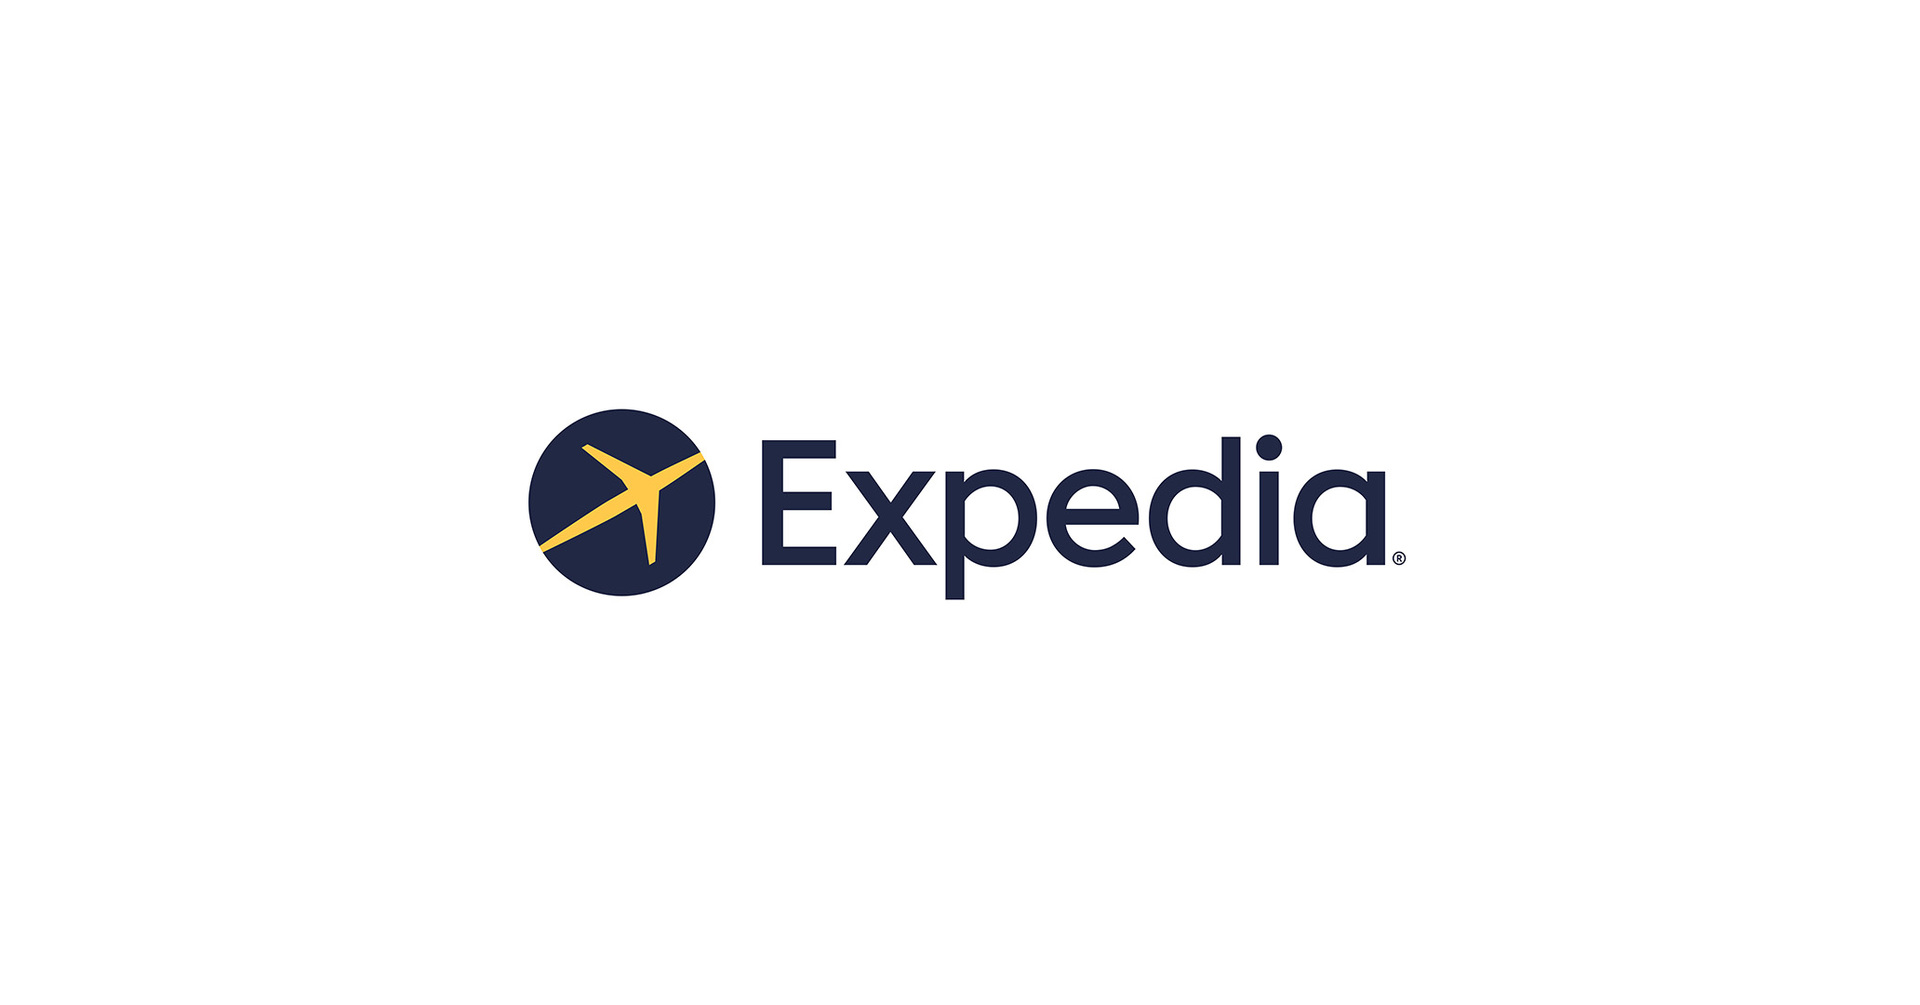 EXPEDIA DATA SPRING BREAK EXPECTED TO BE BUSIER THAN LAST YEAR, WITH